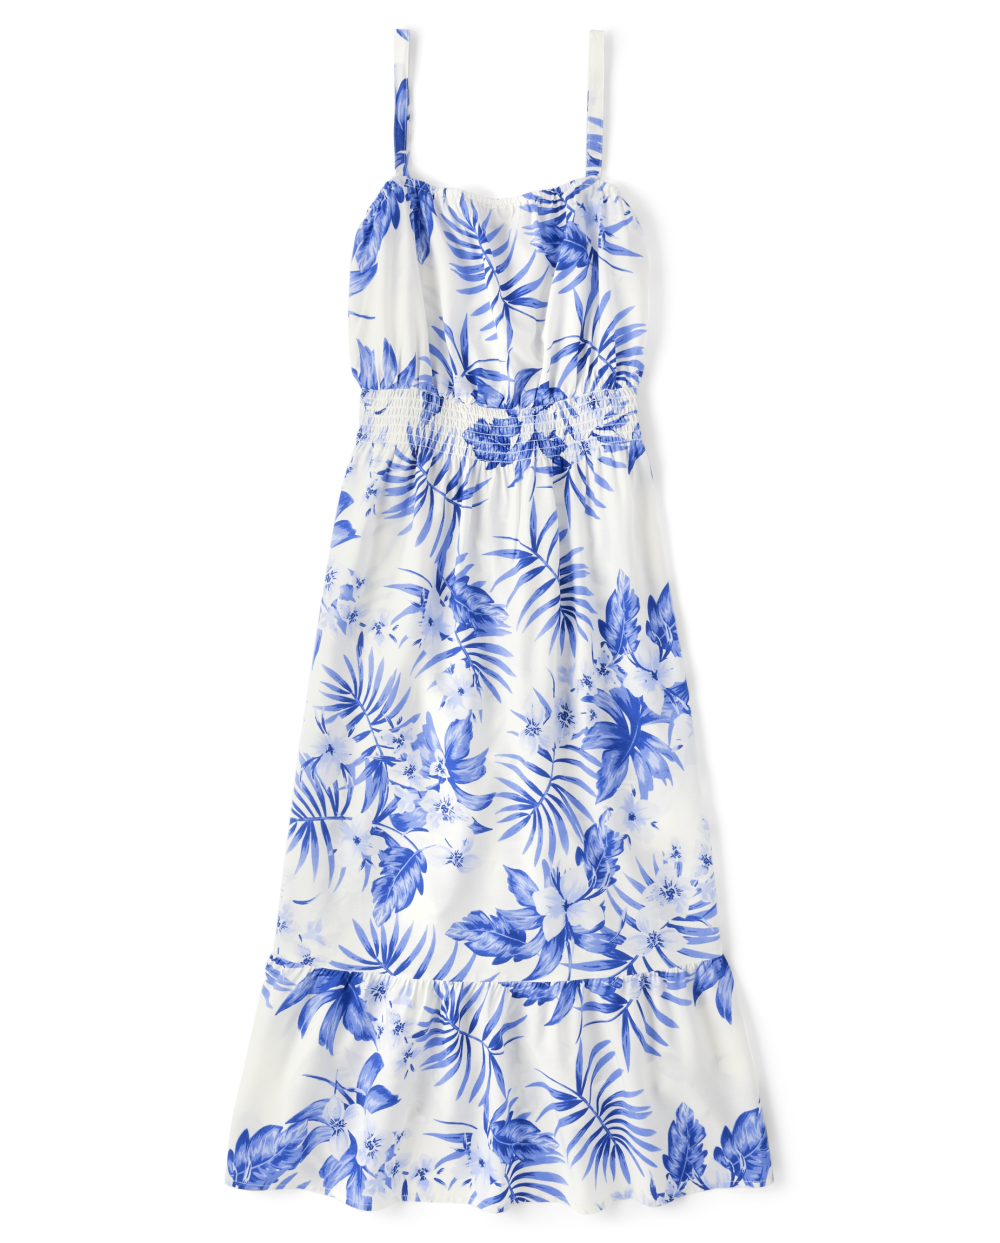 Floral Tropical Print Rayon Sleeveless Square Neck Midi Dress With Ruffles